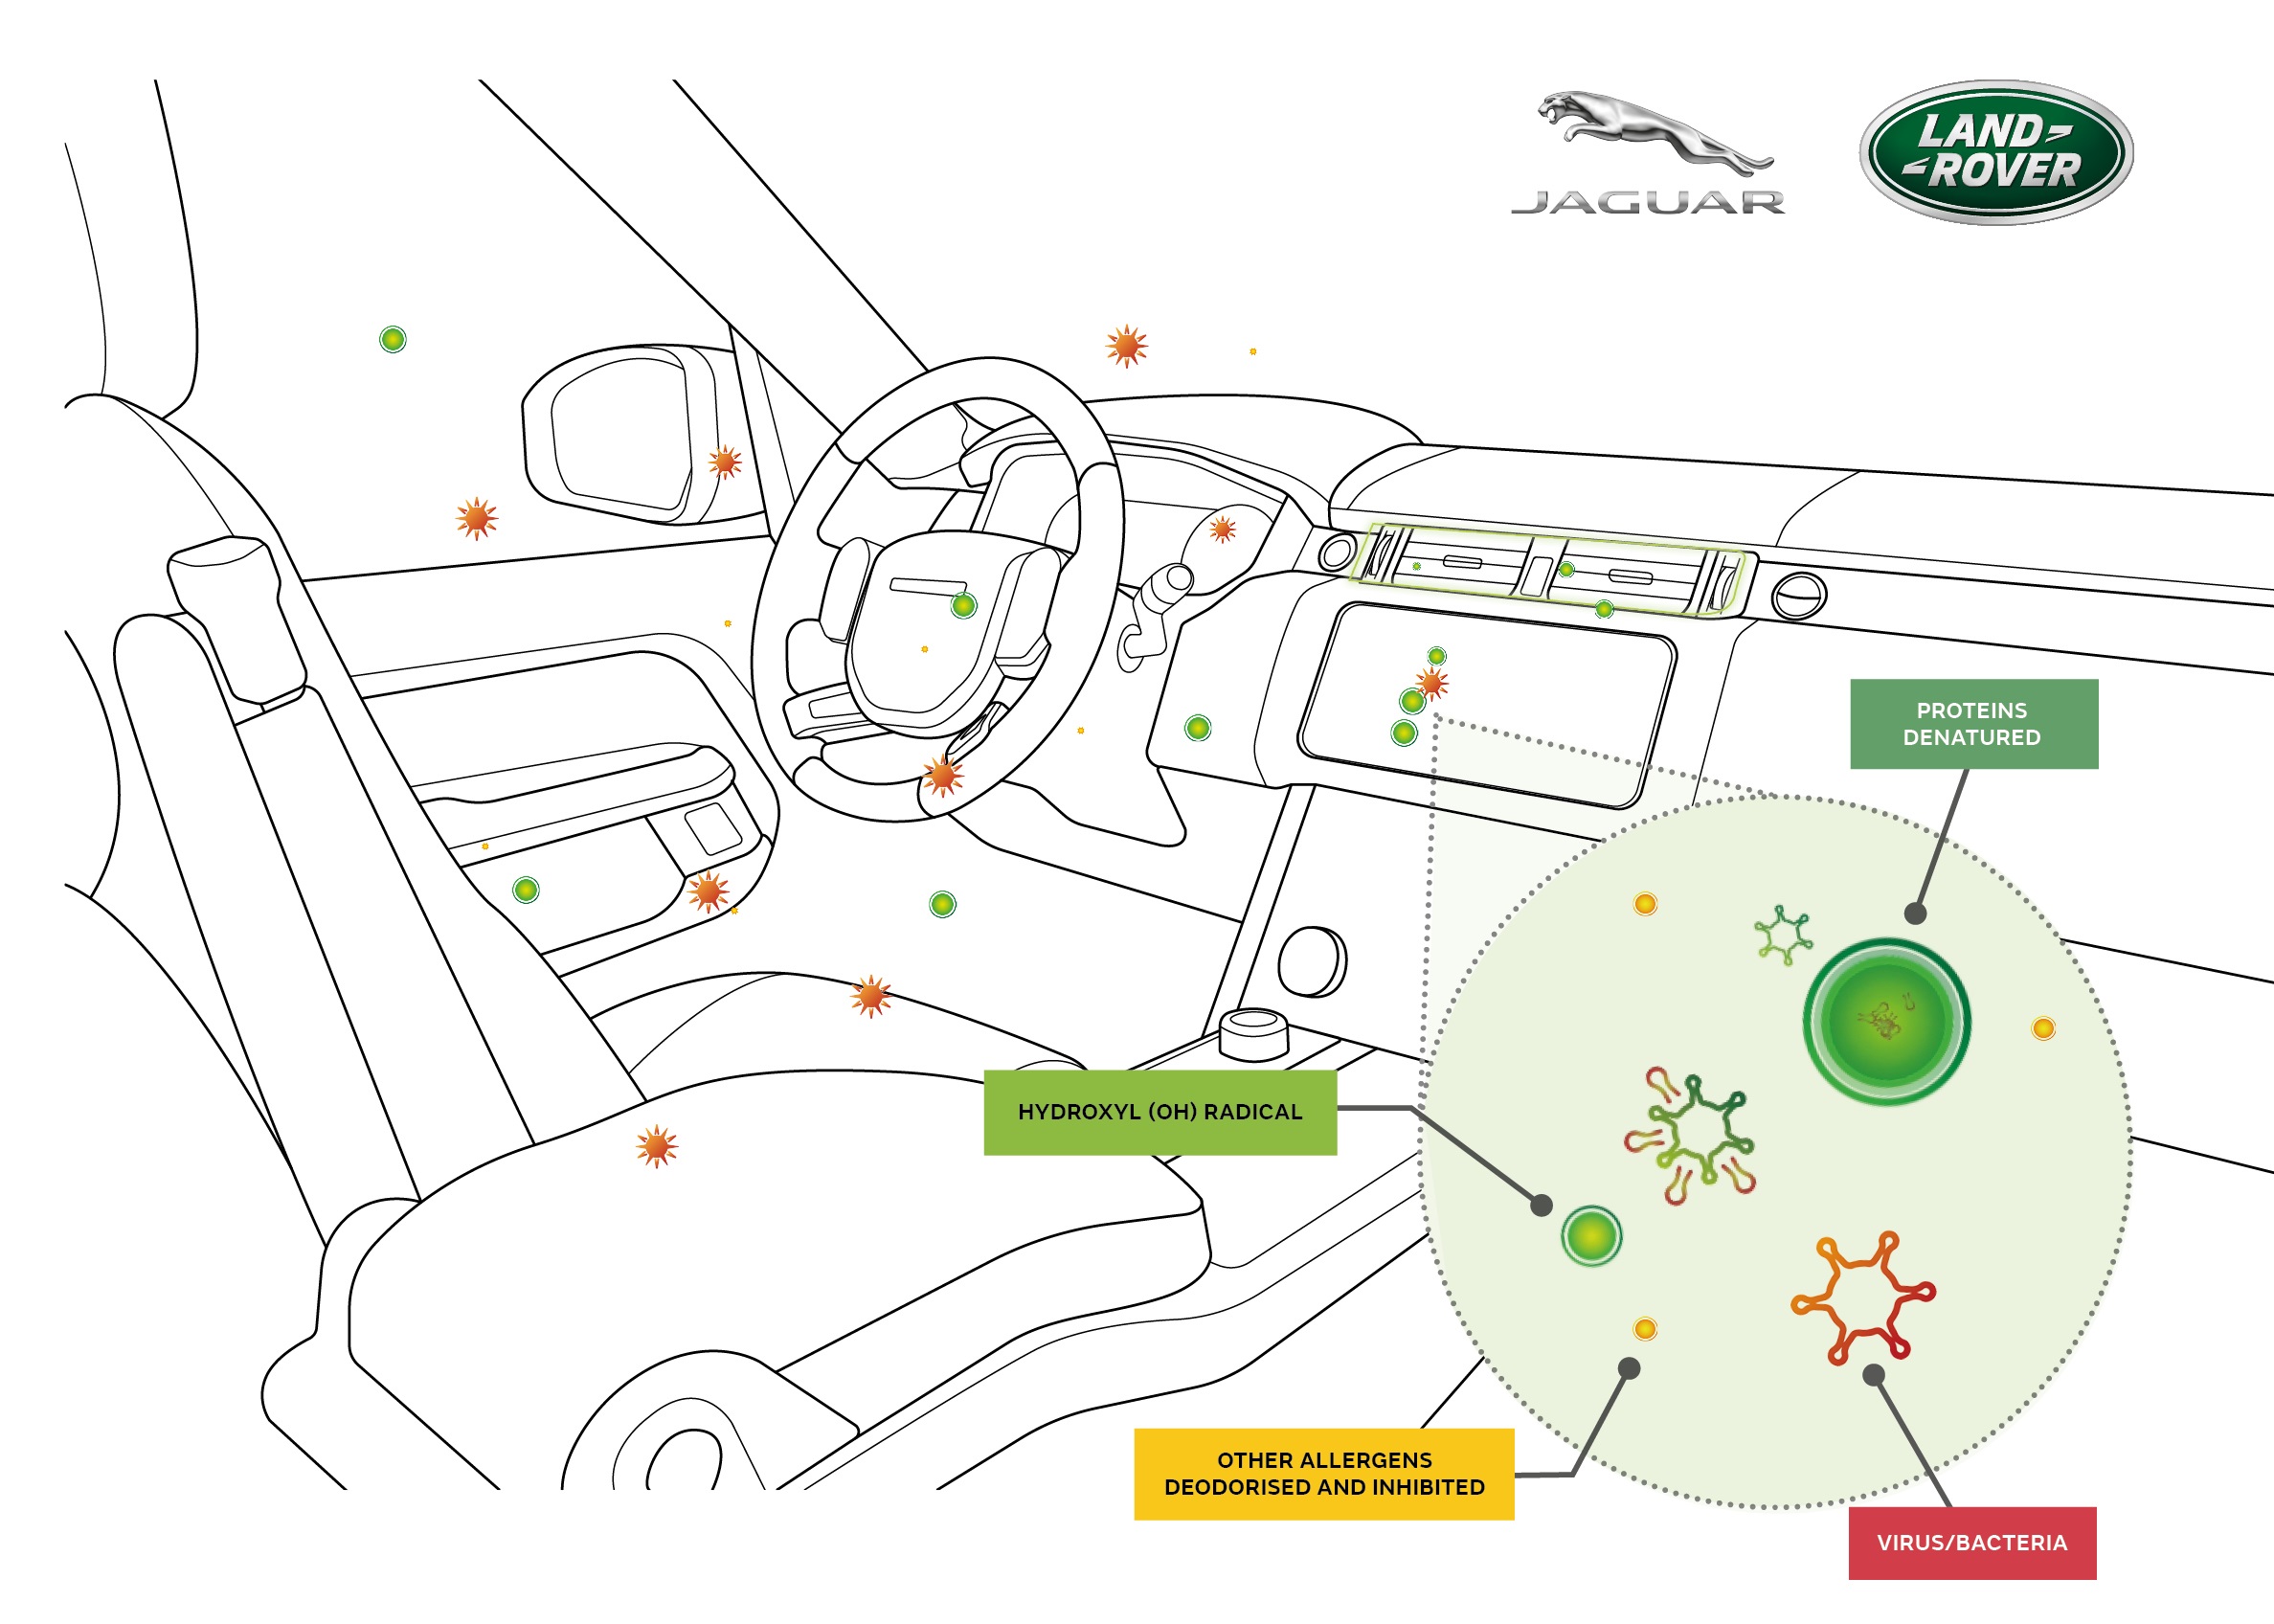 JAGUAR LAND ROVER’S FUTURE AIR PURIFICATION TECHNOLOGY PROVEN TO INHIBIT VIRUSES AND BACTERIA BY UP TO 97 PER CENT